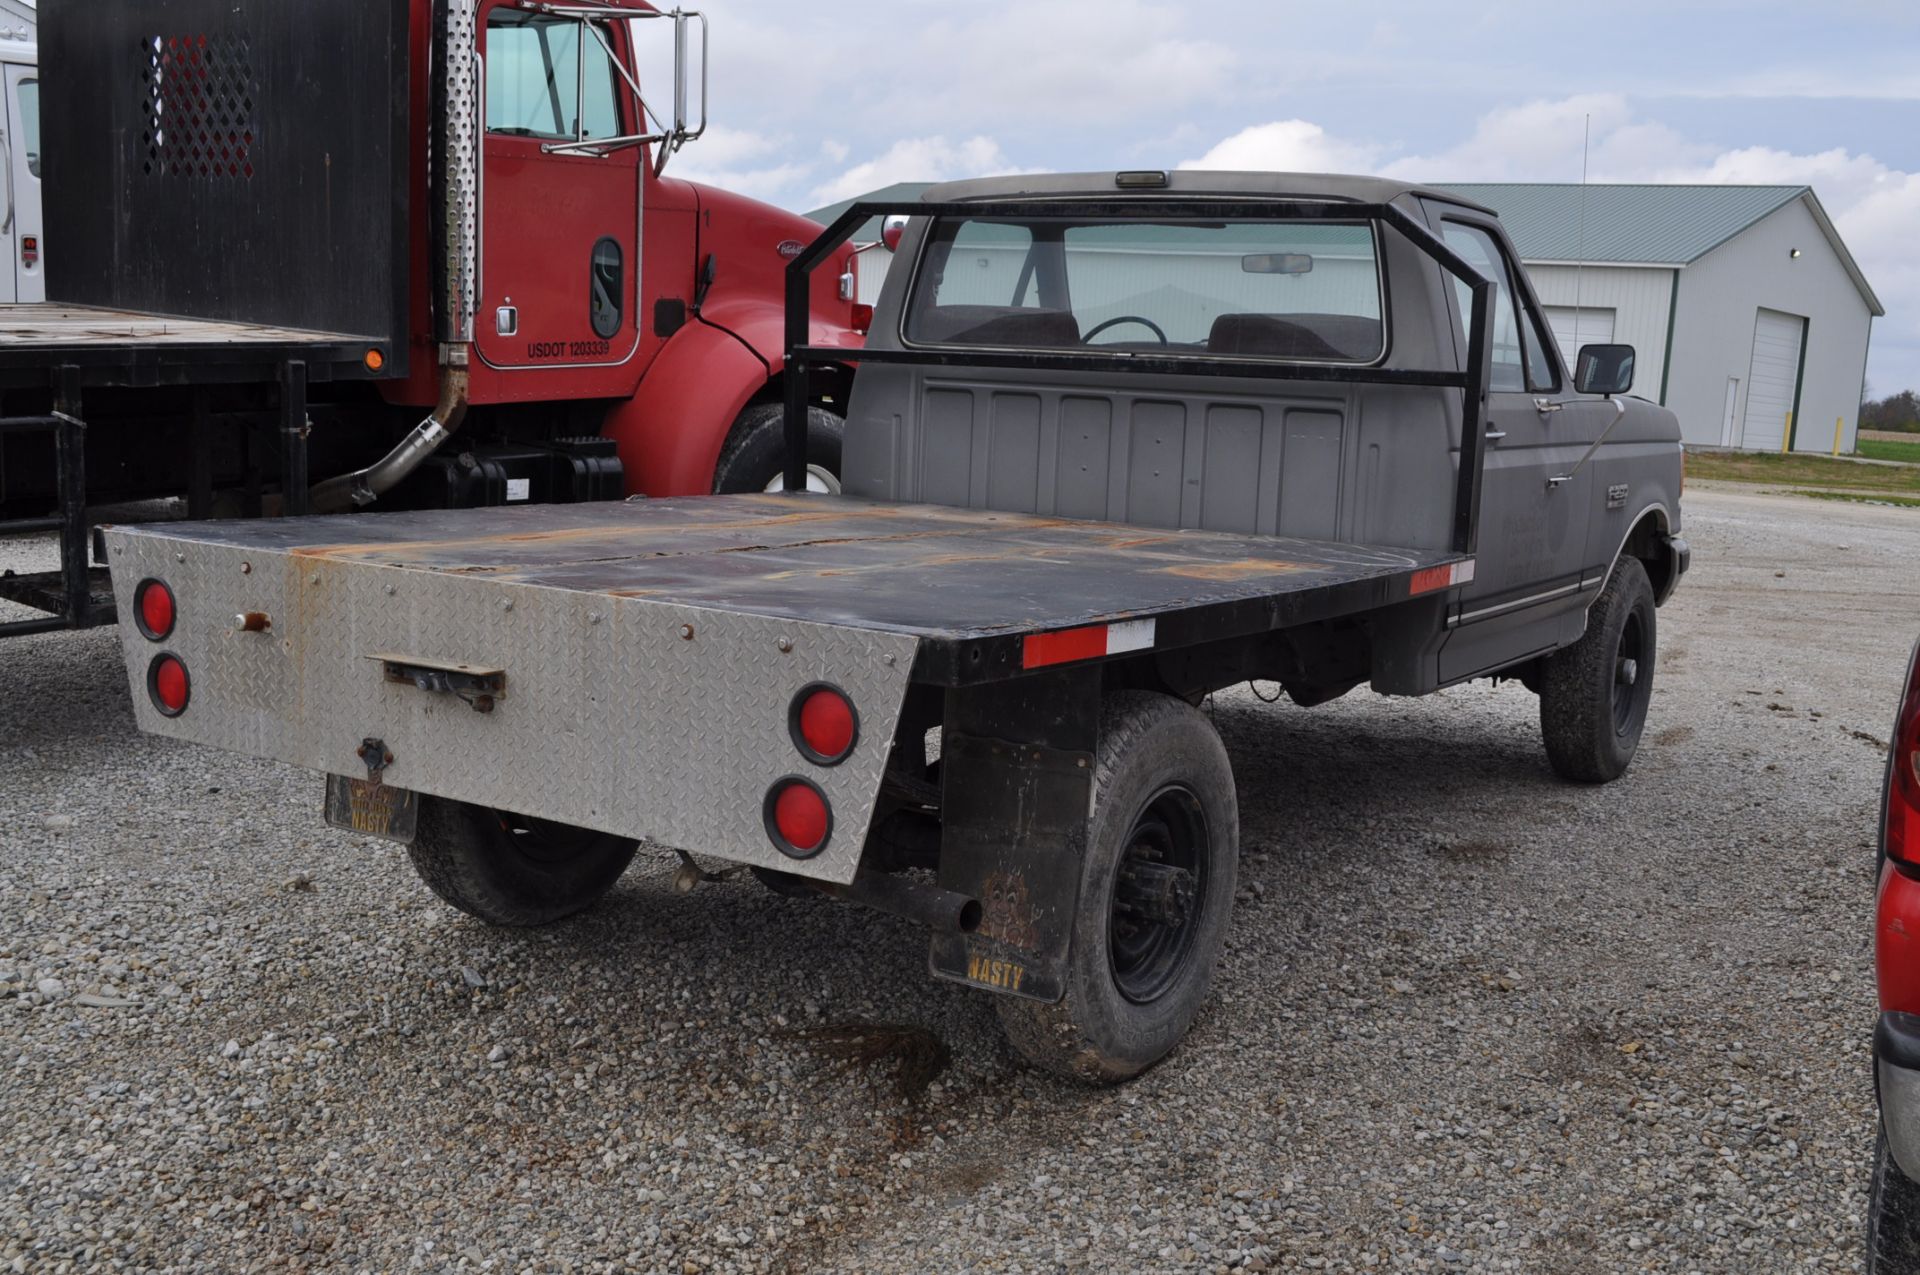 1988 Ford F-250, 4x4, V-8 gas, auto, reg cab, flatbed, shows 44,935 miles, VIN 1FTHF26H7JNA61411 - Image 4 of 11